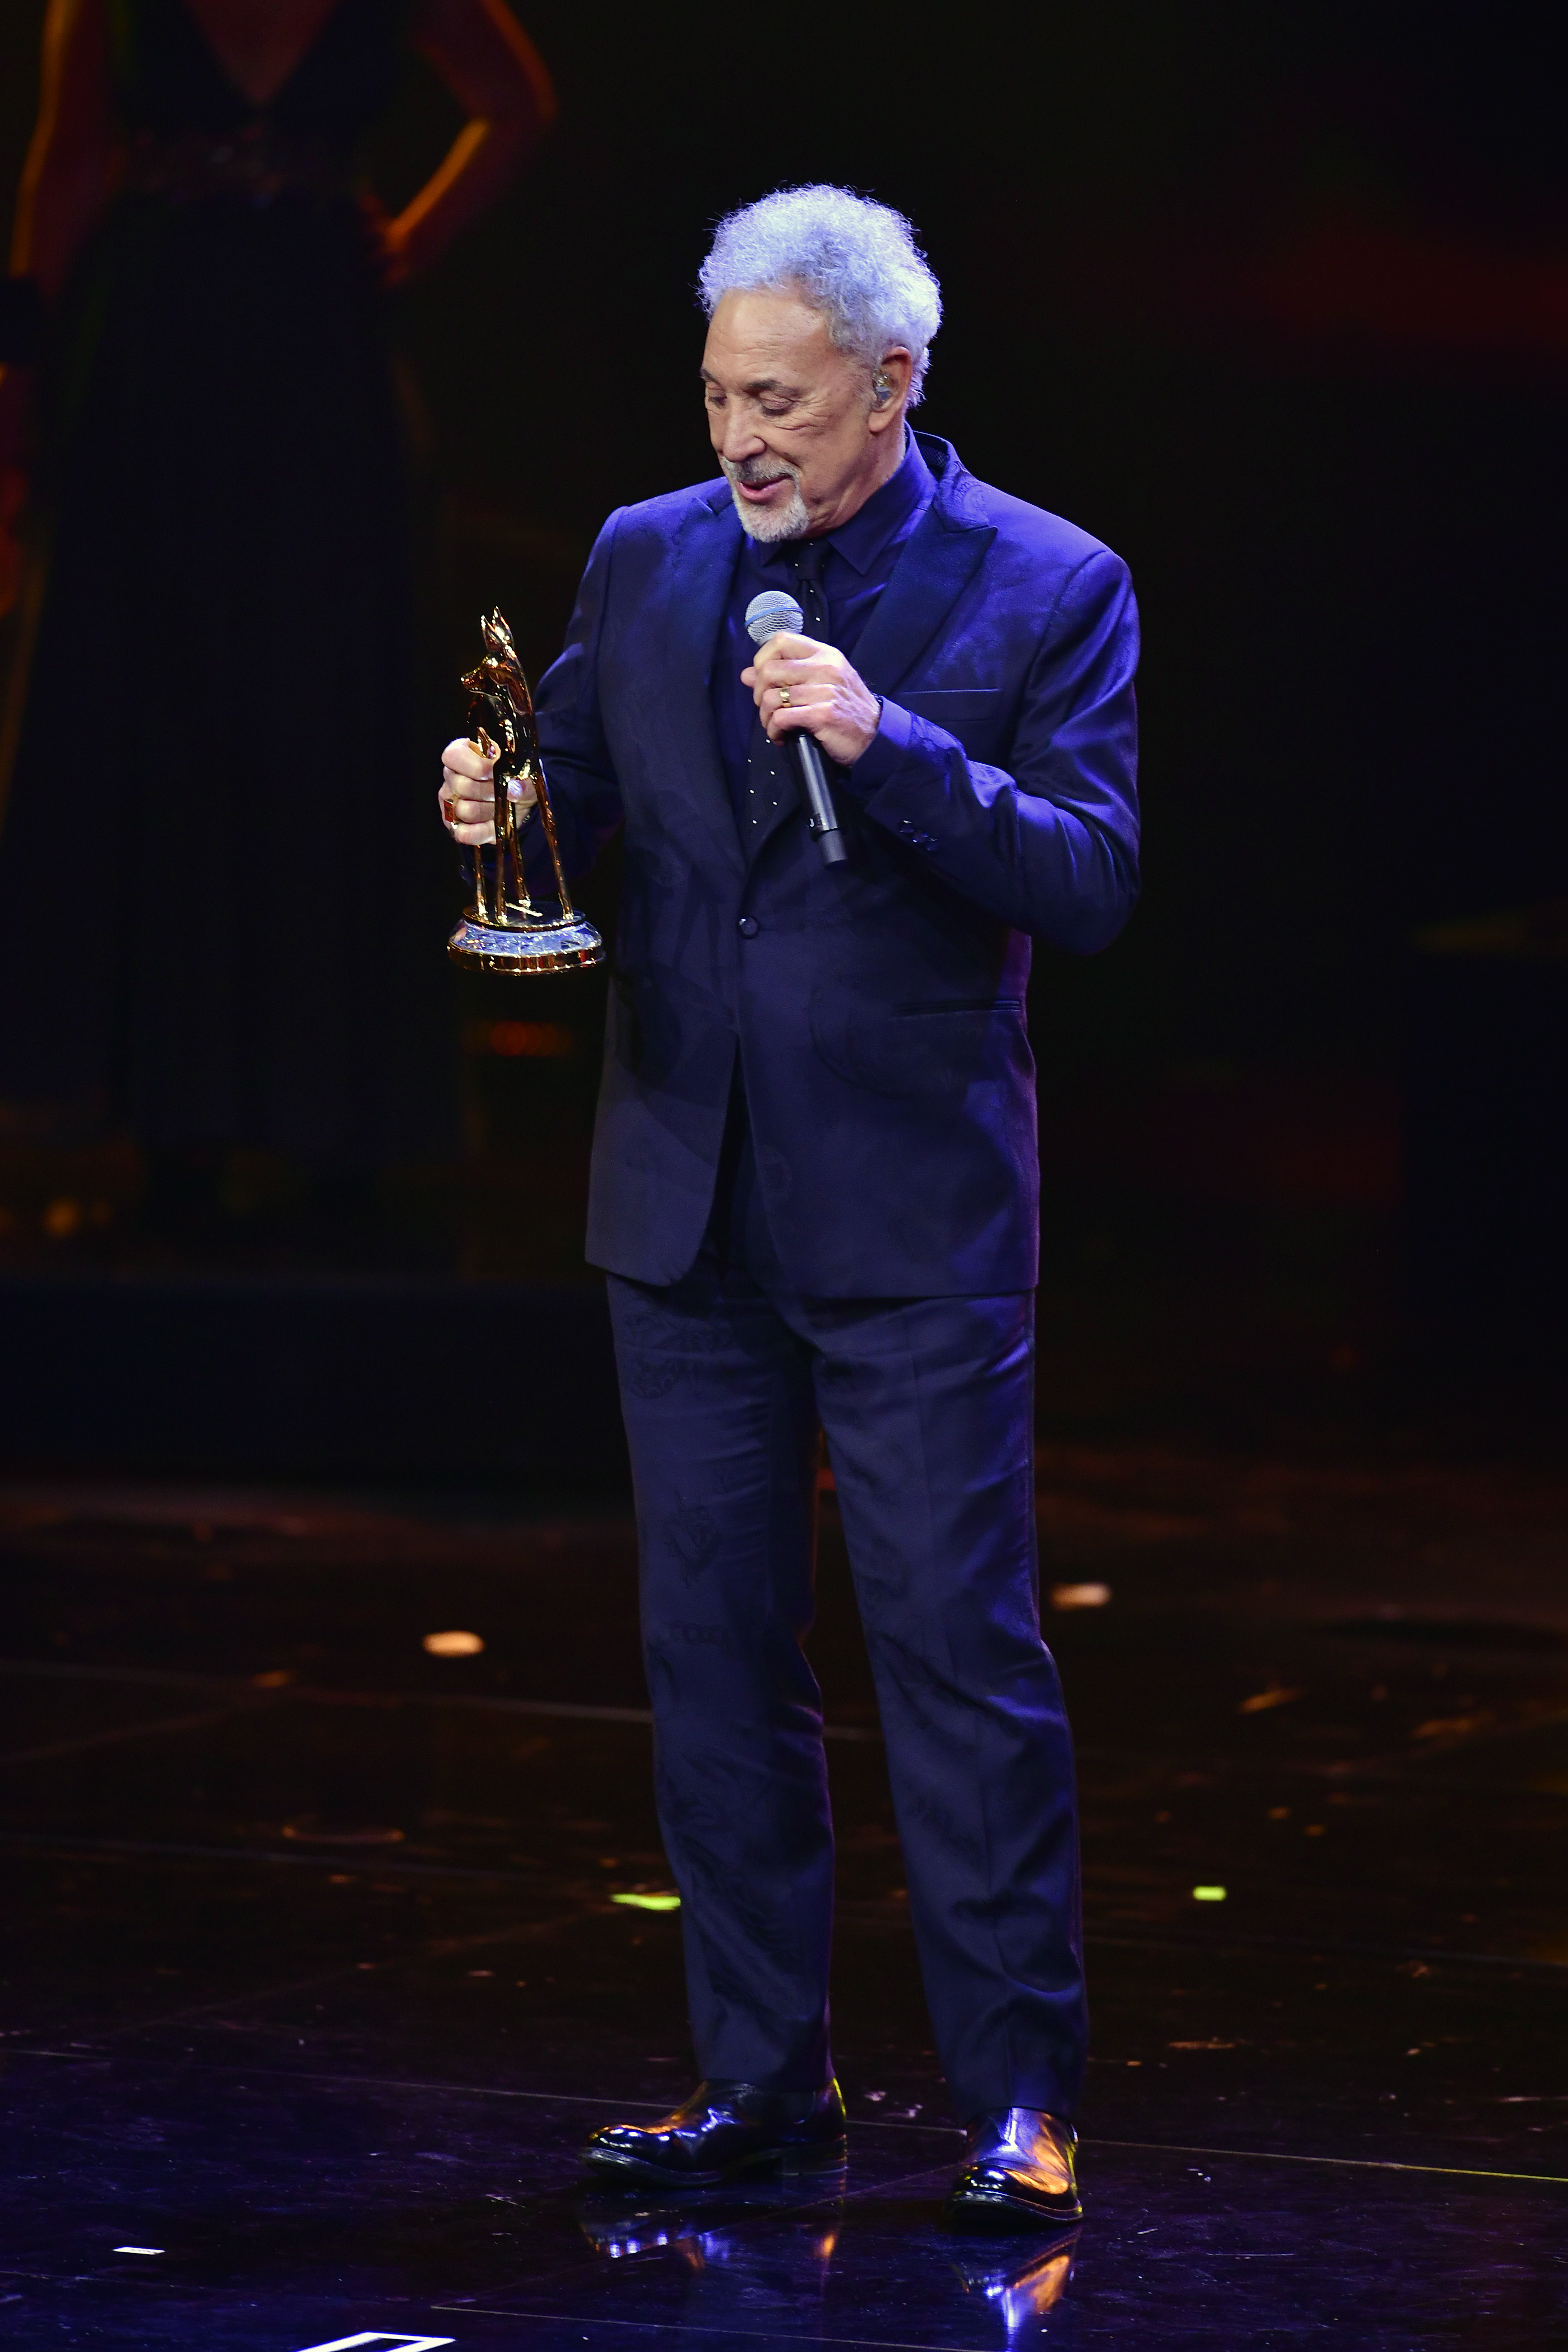 Tom Jones at the Bambi Awards 2017 show in Berlin, Germany on November 16, 2017 | Source: Getty Images